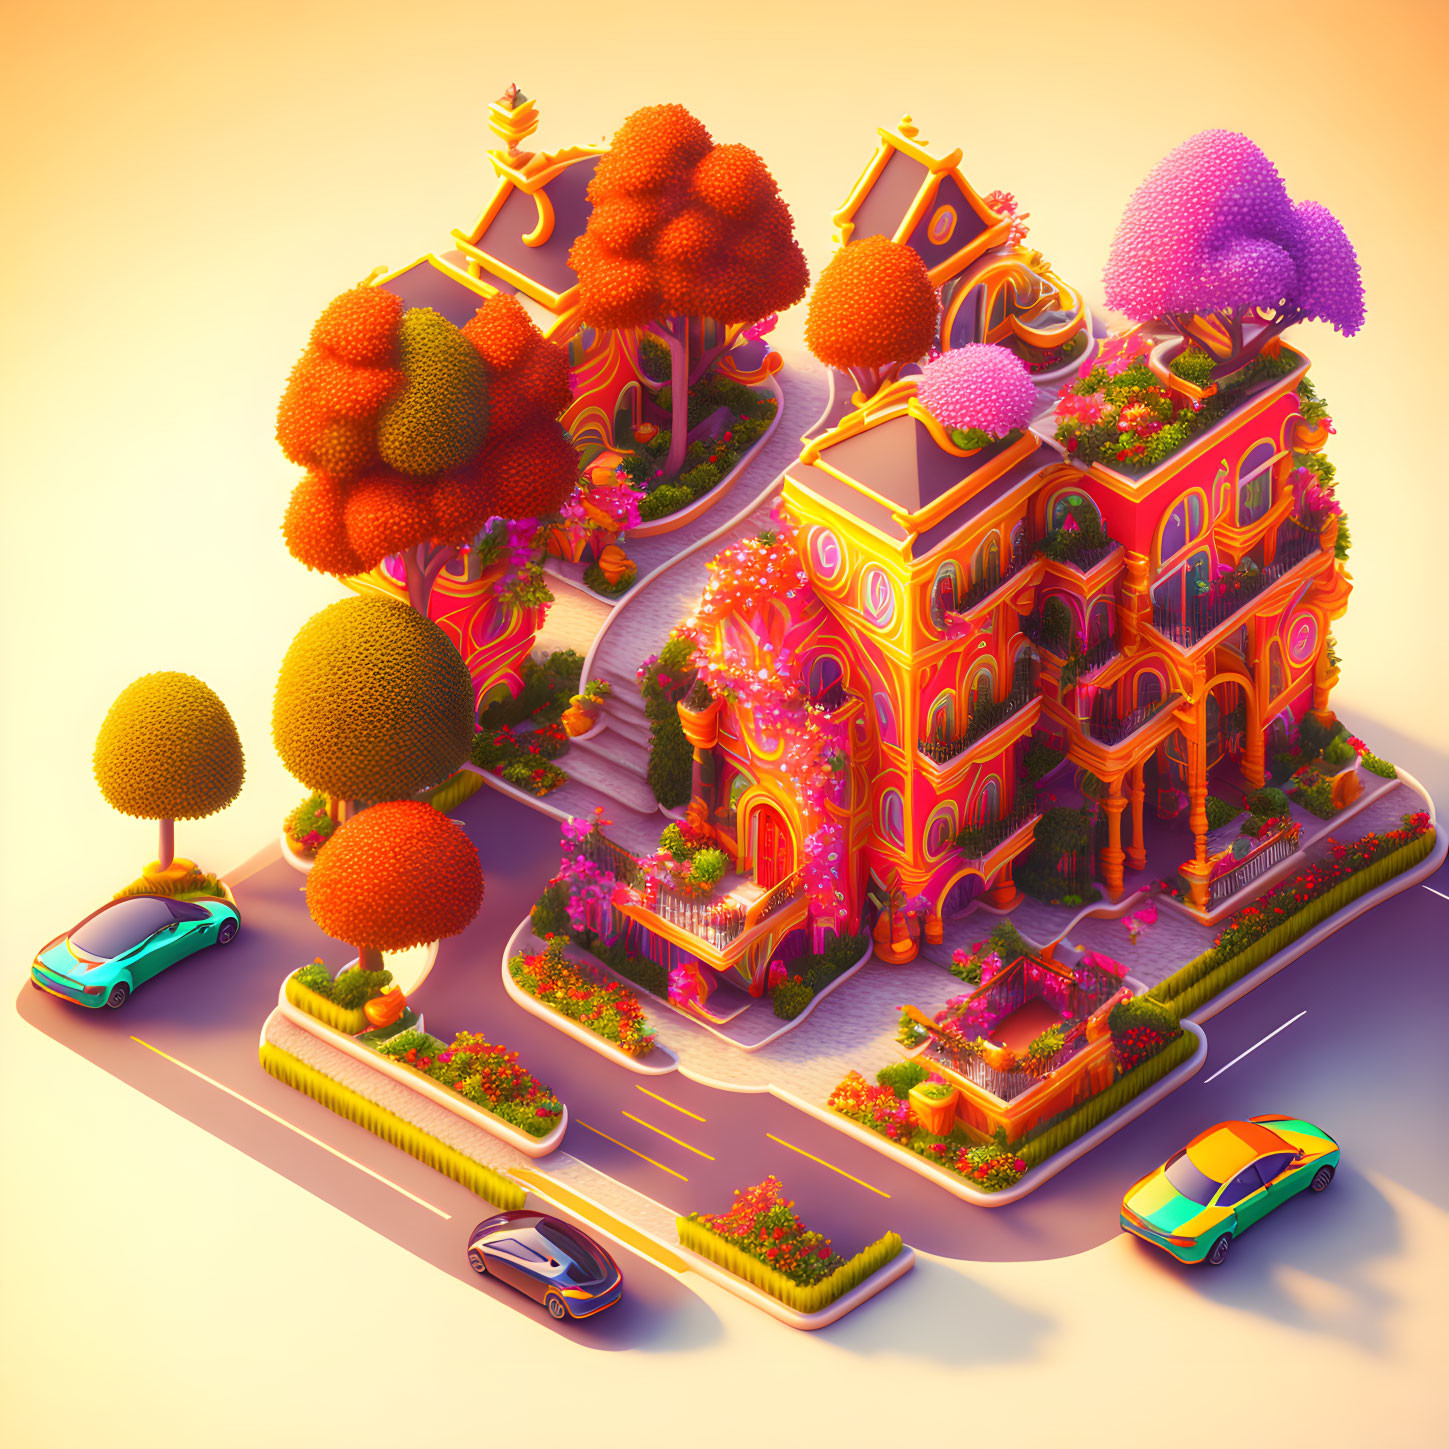 Colorful 3D illustration of whimsical orange building and futuristic cars